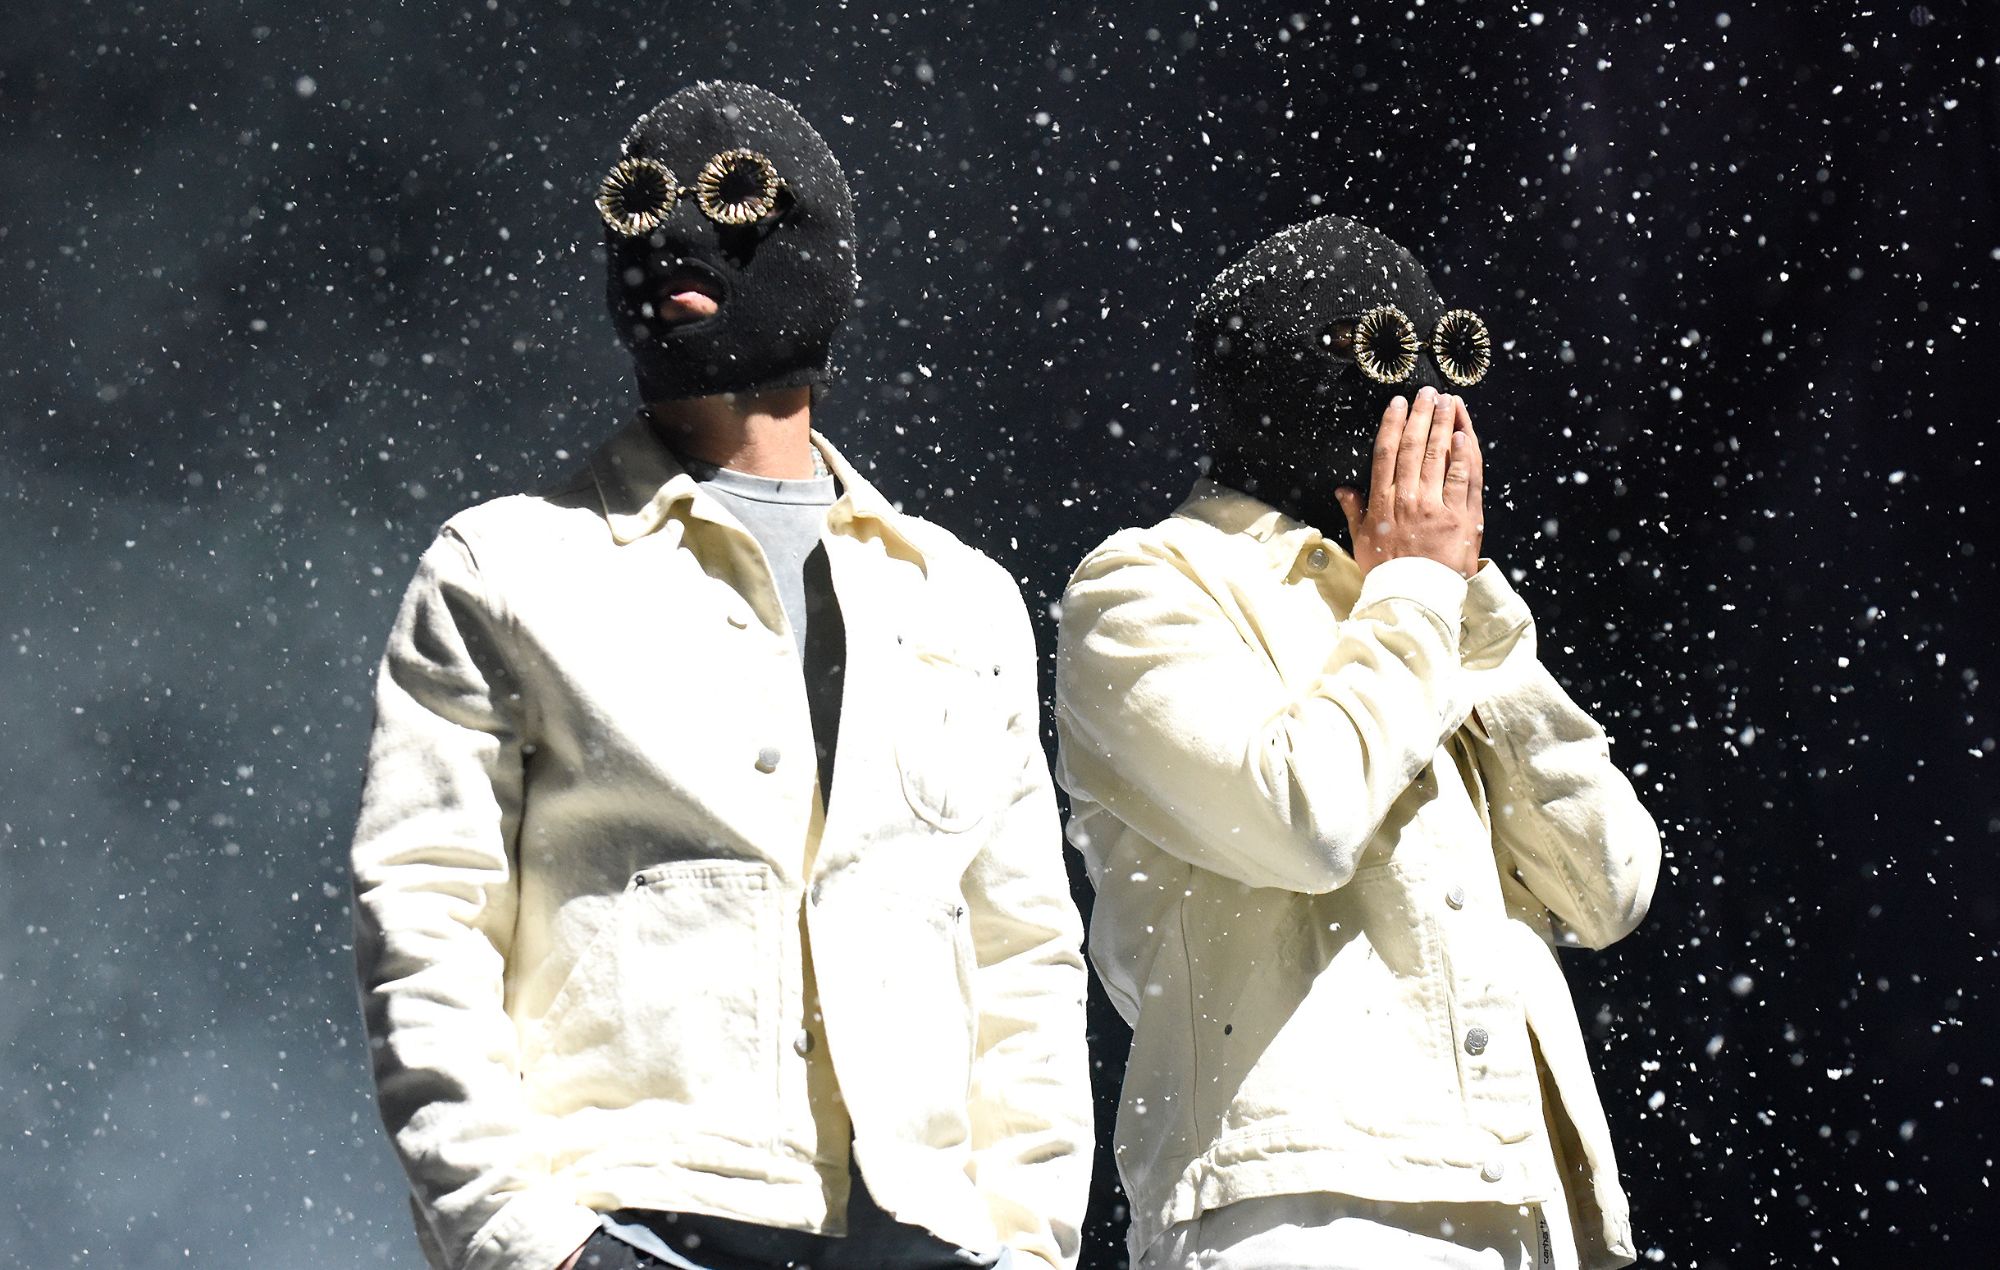 Listen to Twenty One Pilots’ new “cosy” 10 hour mix of songs